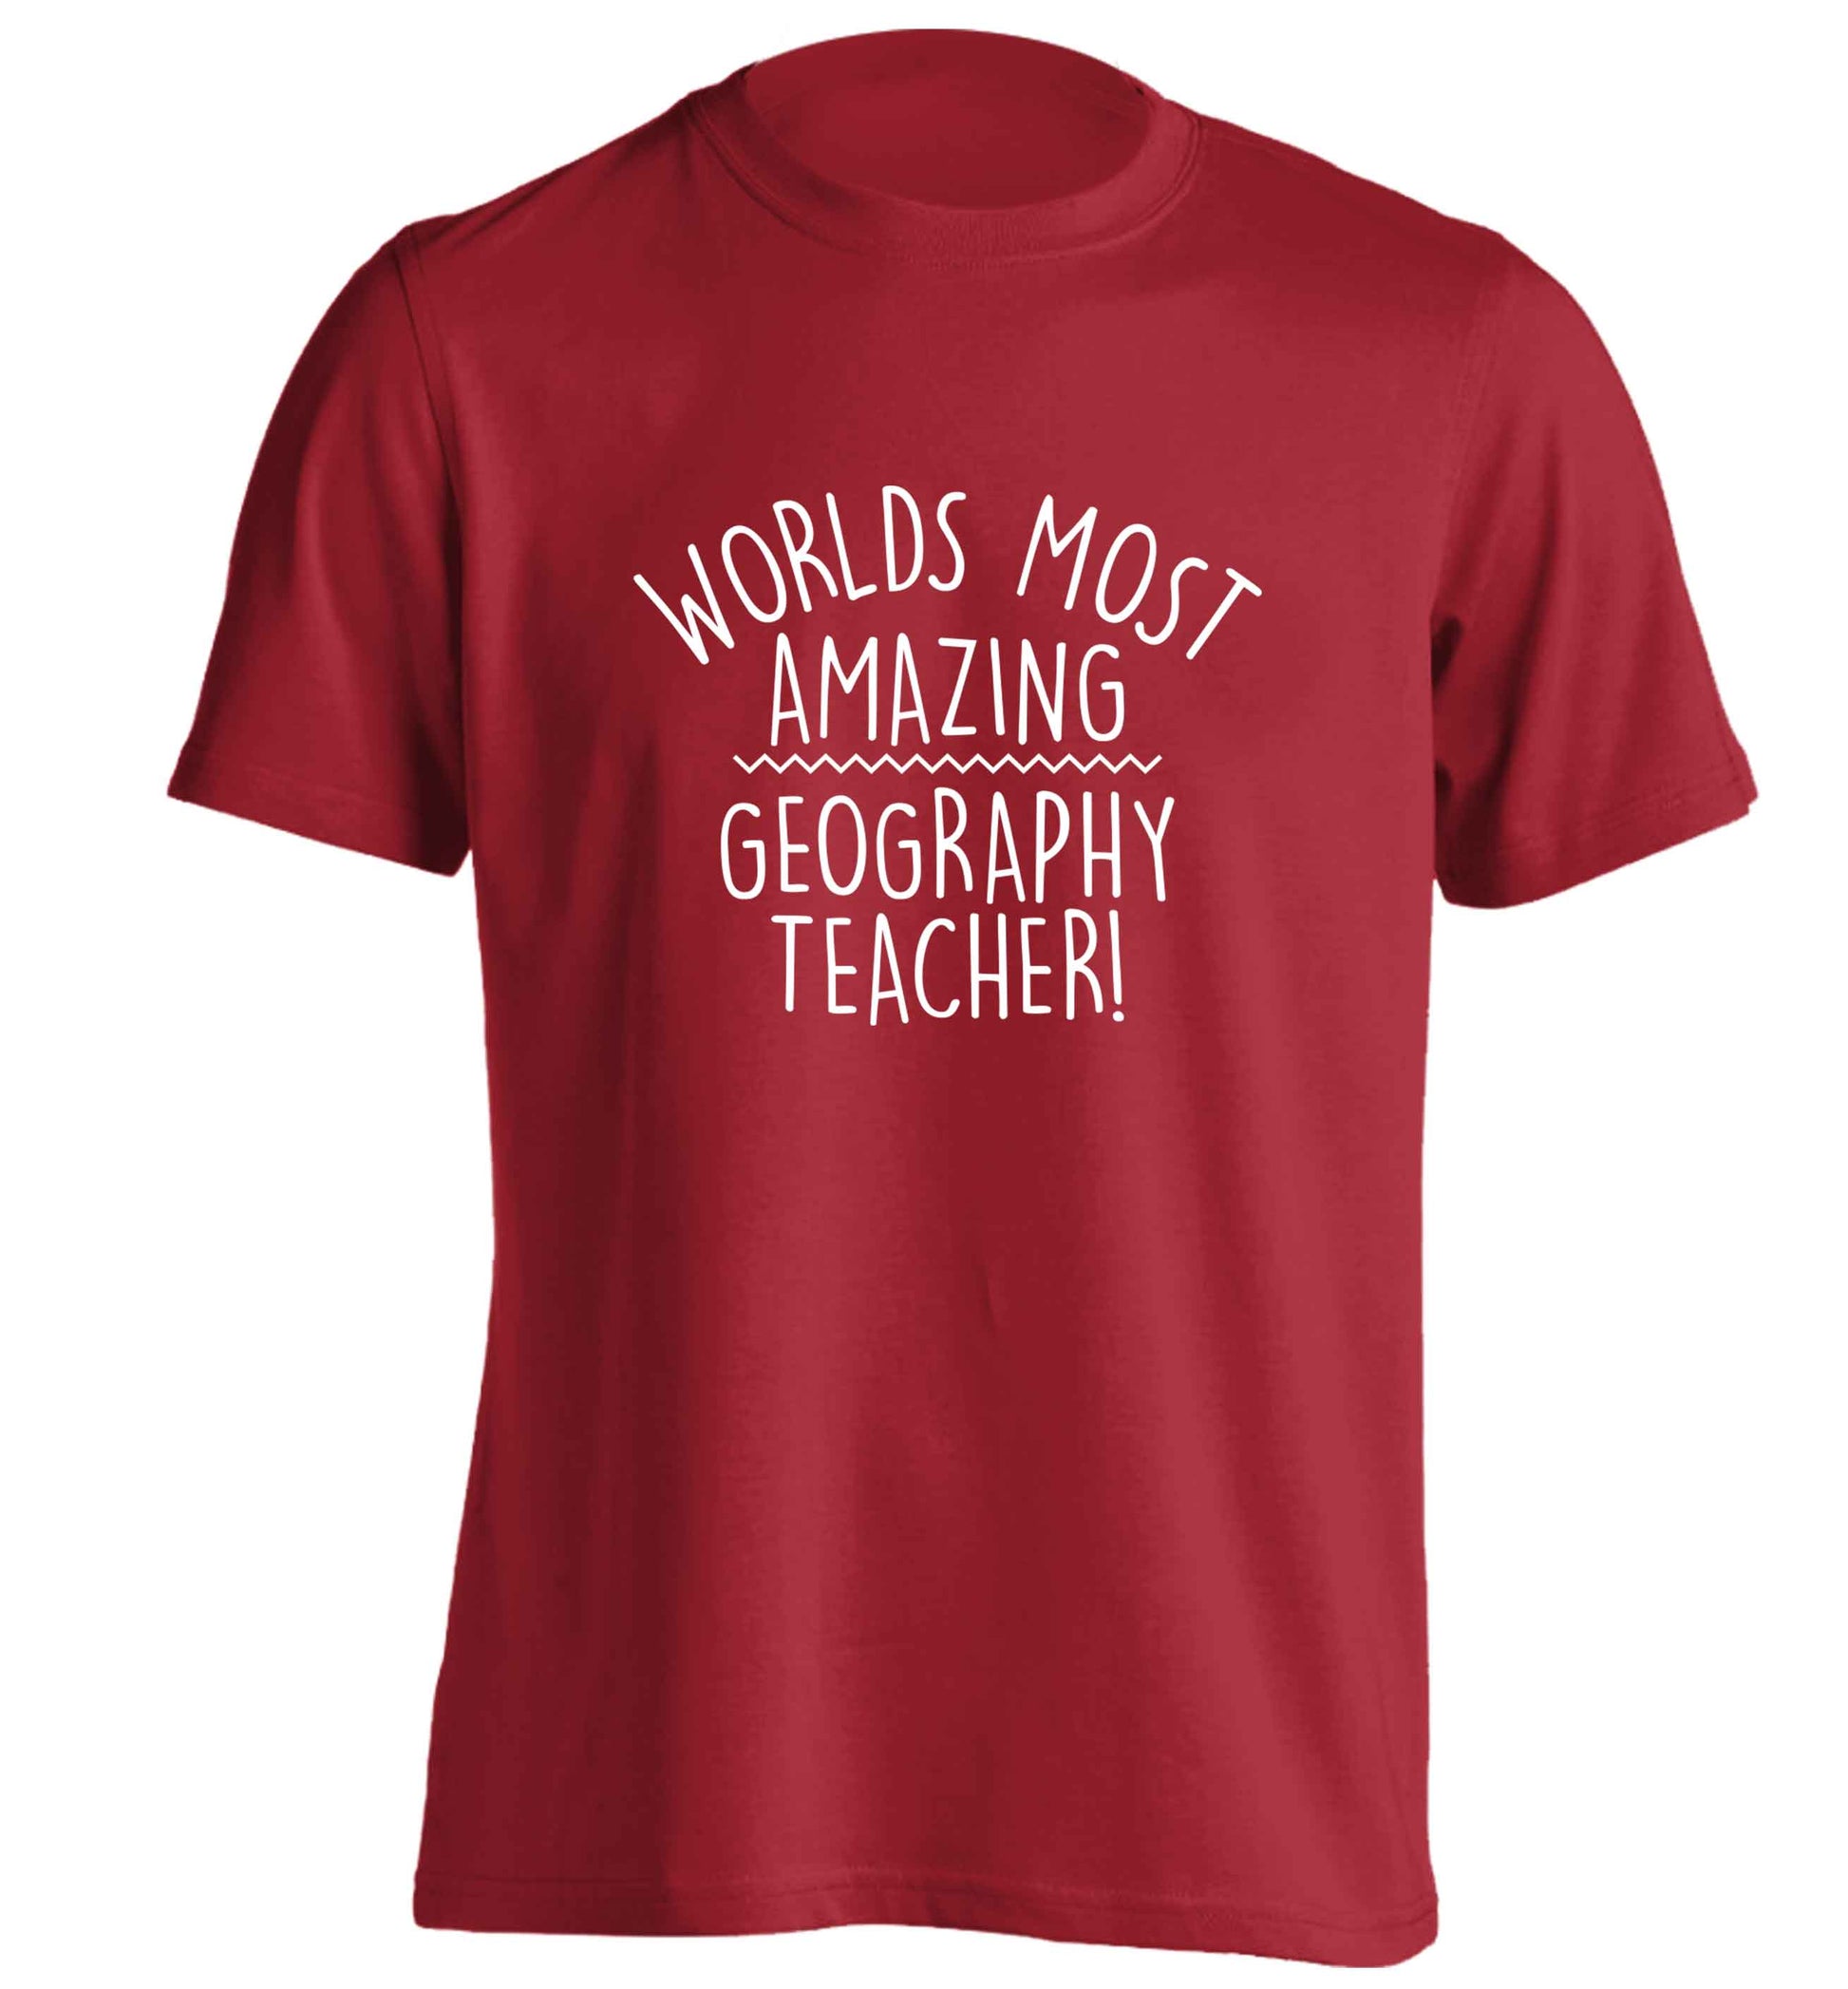 Worlds most amazing geography teacher adults unisex red Tshirt 2XL